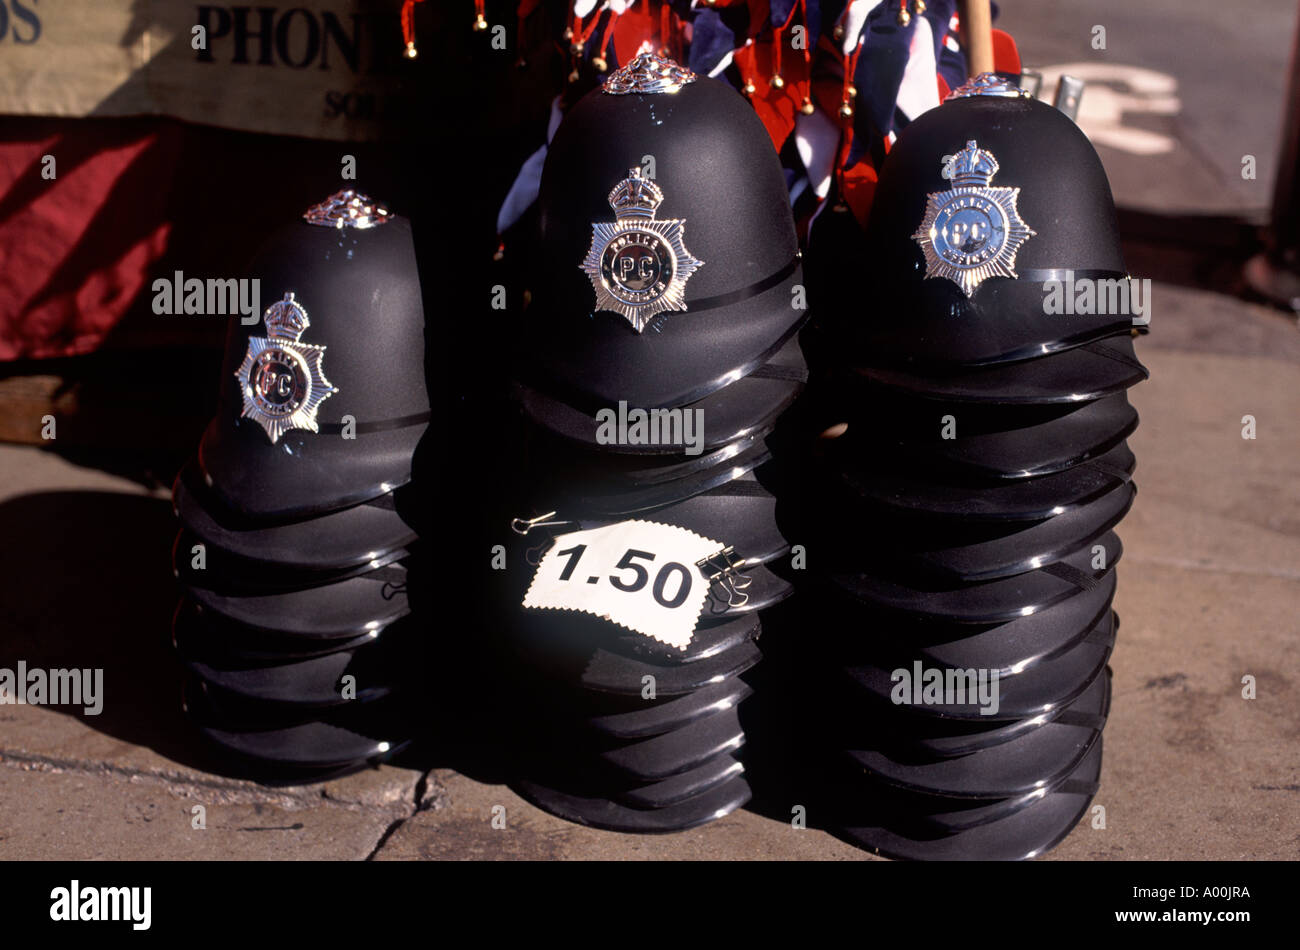 Plastic bobby helmets piled for sale at outdoor market stall on Oxford Street, London, England Stock Photo